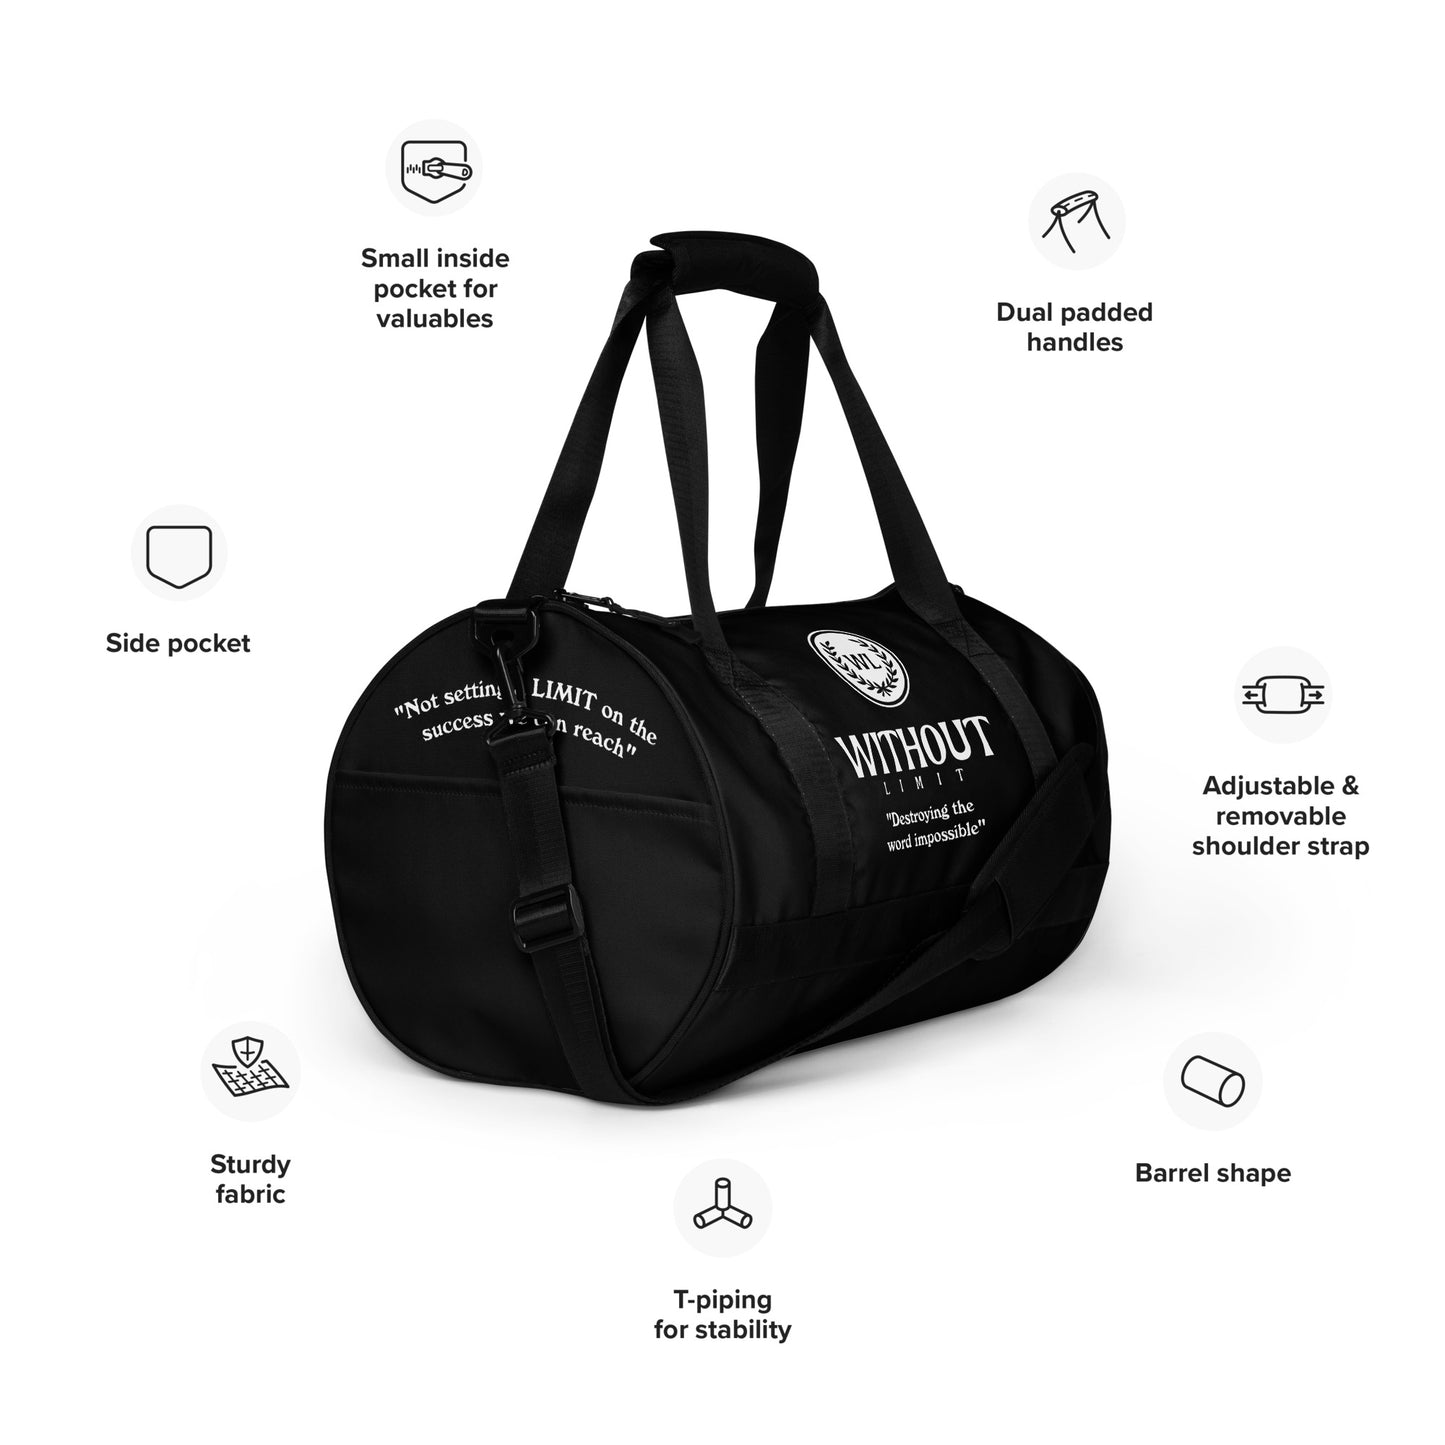 Without Limit Gym bag